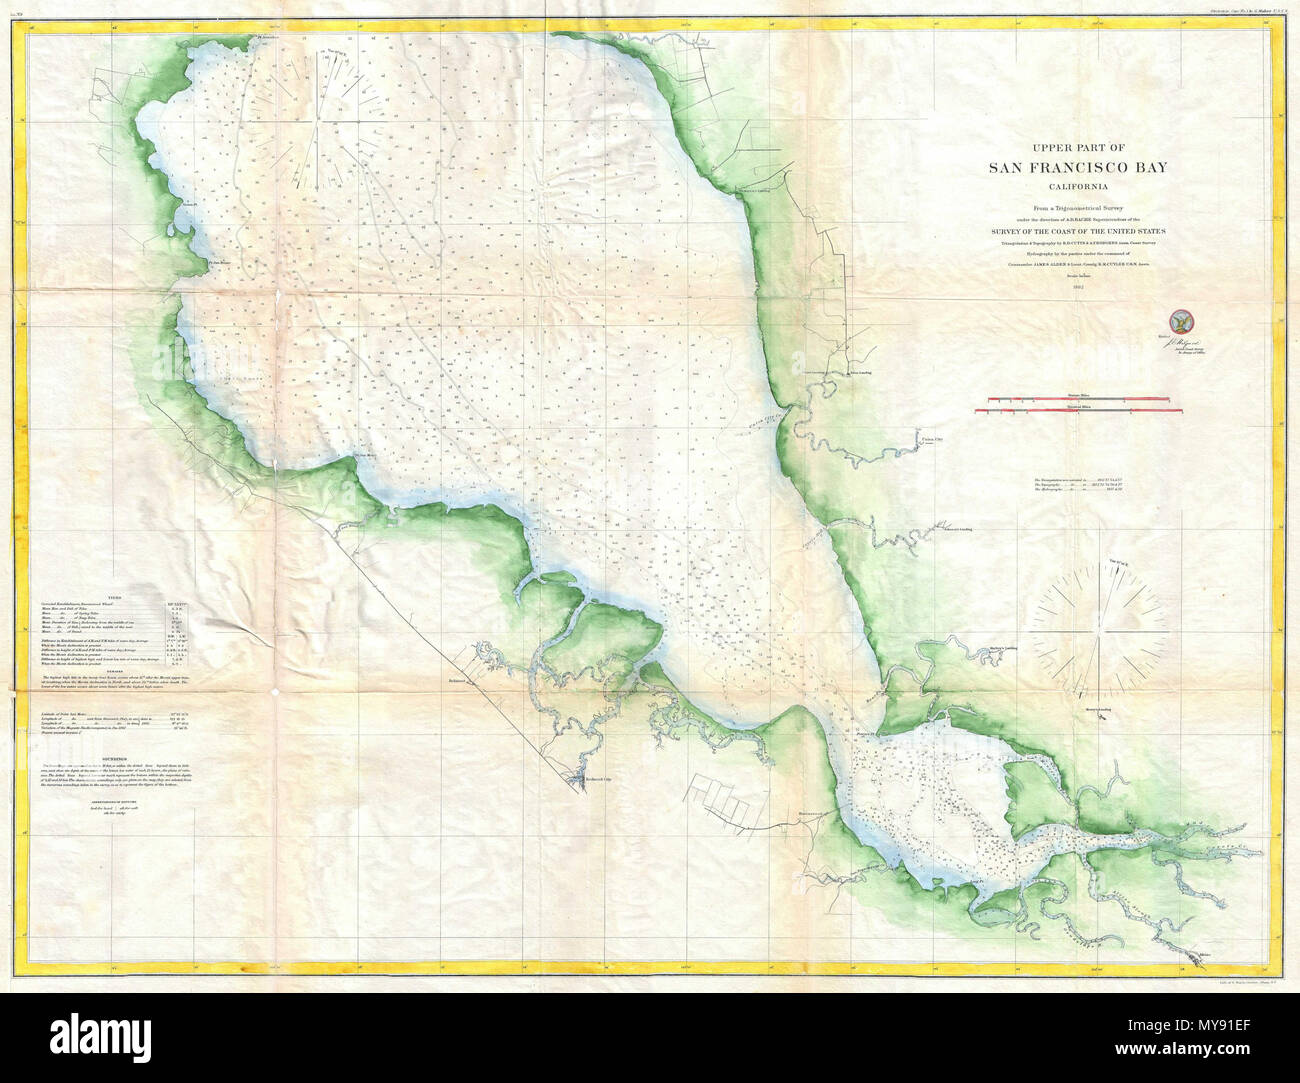 . Upper Part of San Francisco Bay, California.  English: This is an attractive 1863 U.S. Coast Survey chart or nautical map or the southern part of San Francisco Bay, California. Covers from Alviso and Redwood city northward as far as Point Avisadera. Includes Union City, Johnson’s Landing. Eden Landing. Mayhew’s Landing, Ravenswood, San Francisquito Creek, Belmont, San Mateo and San Bruno. Offers thousands of depth soundings but true to form as nautical chart very little inland detail. Sailing instructions and tidal notation in the lower left hand quadrant. The triangulation and Topography su Stock Photo